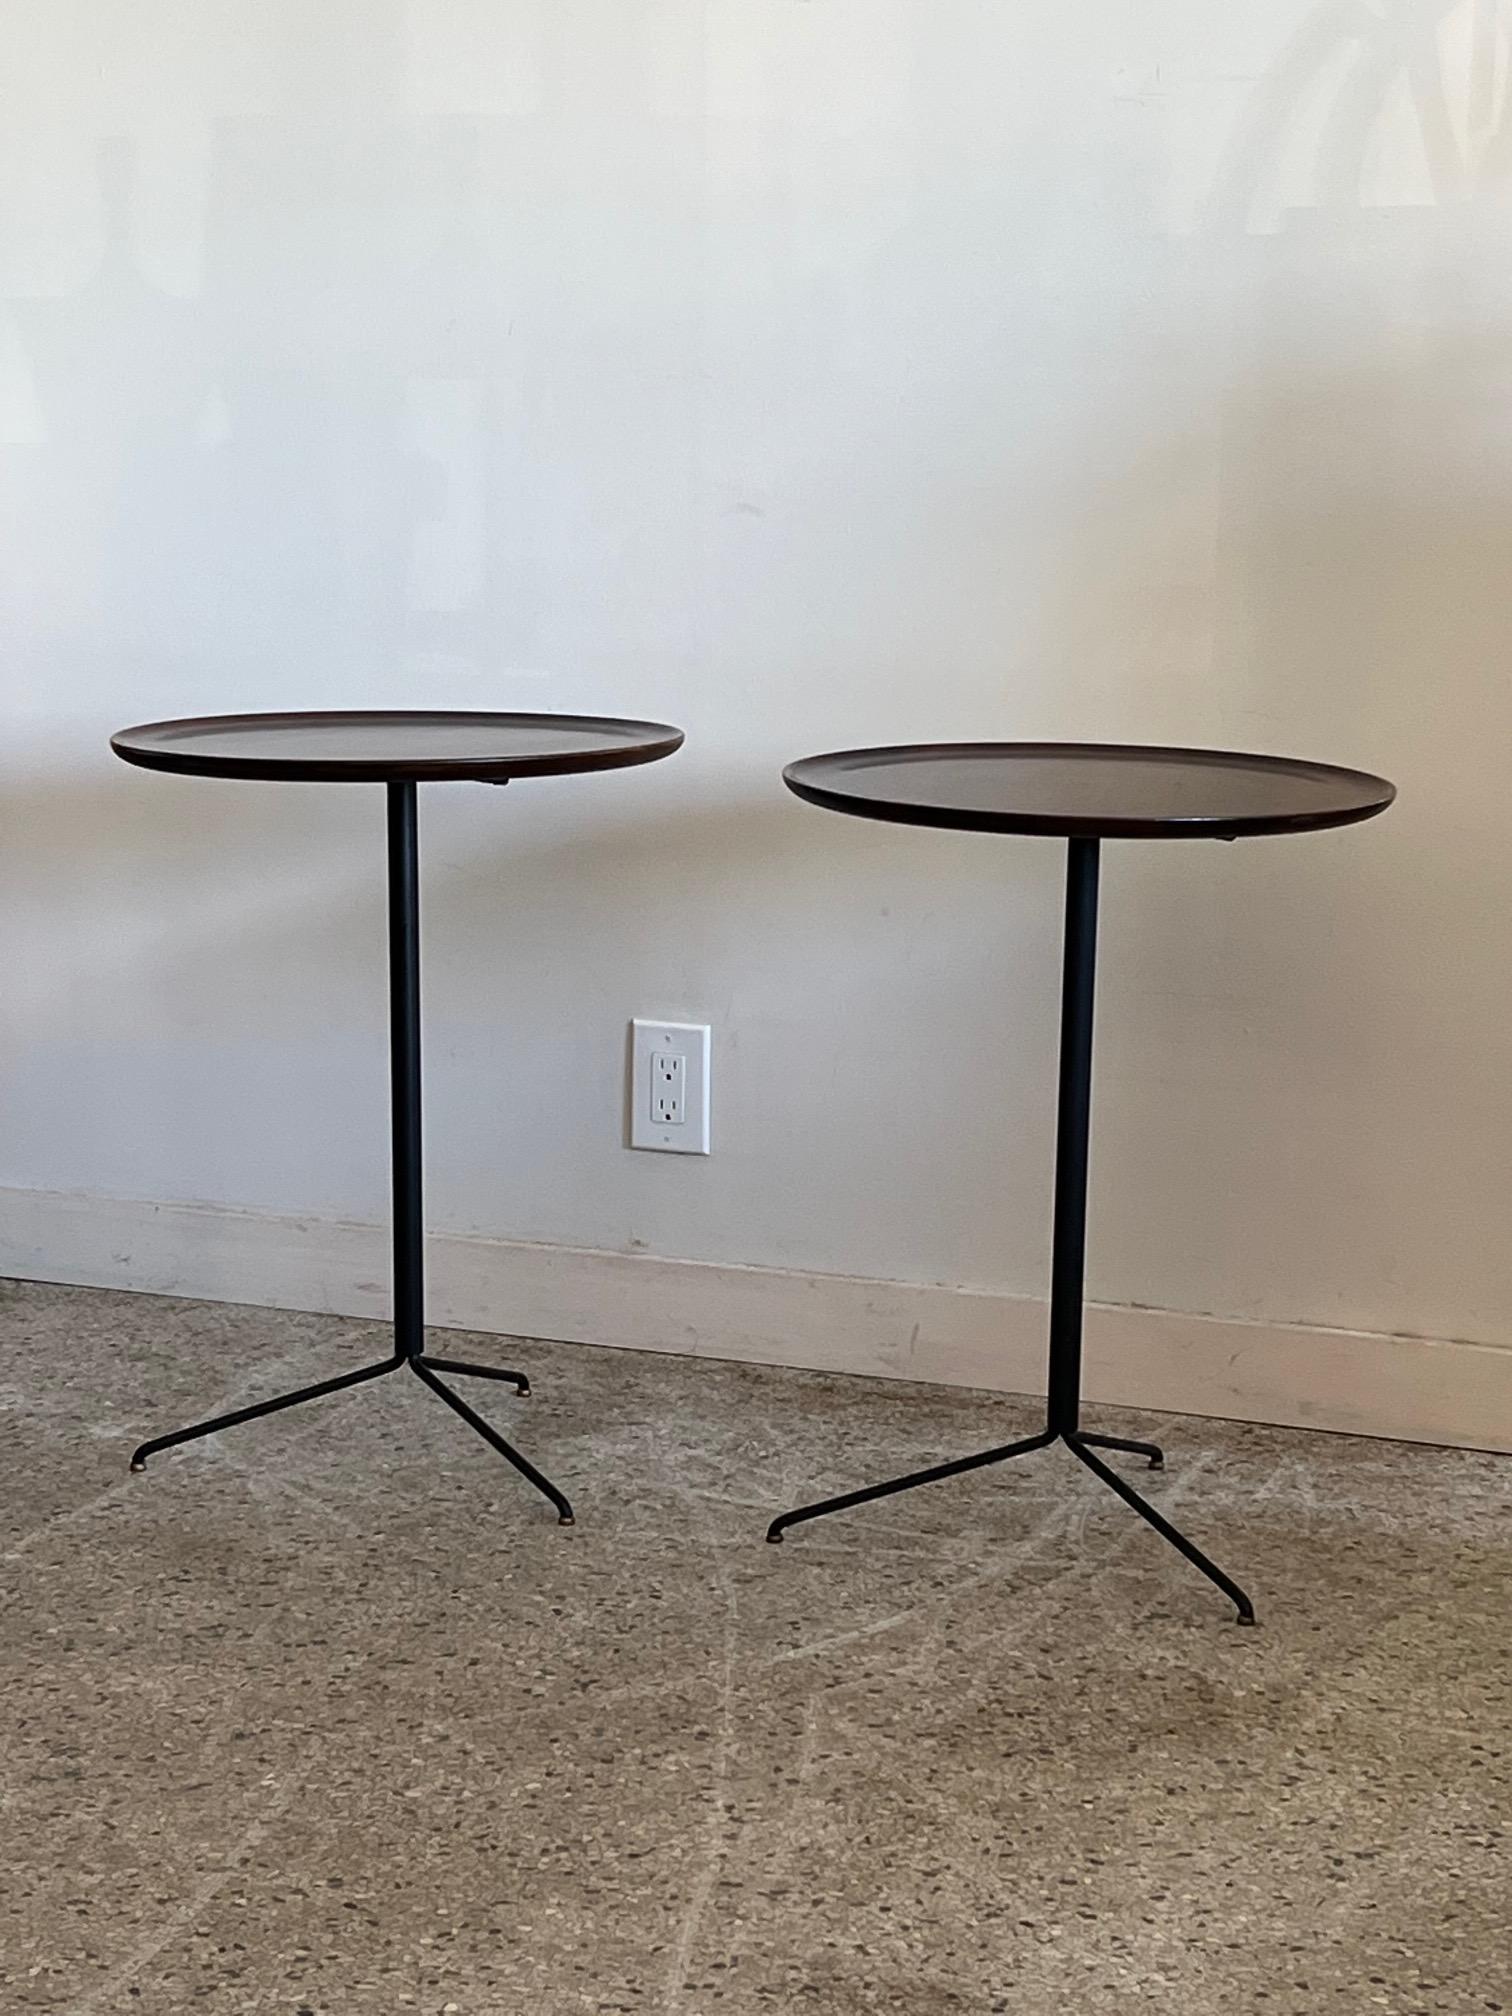 A pair of elegant side tables or gueridons. Tripod bases with pie shaped tops.